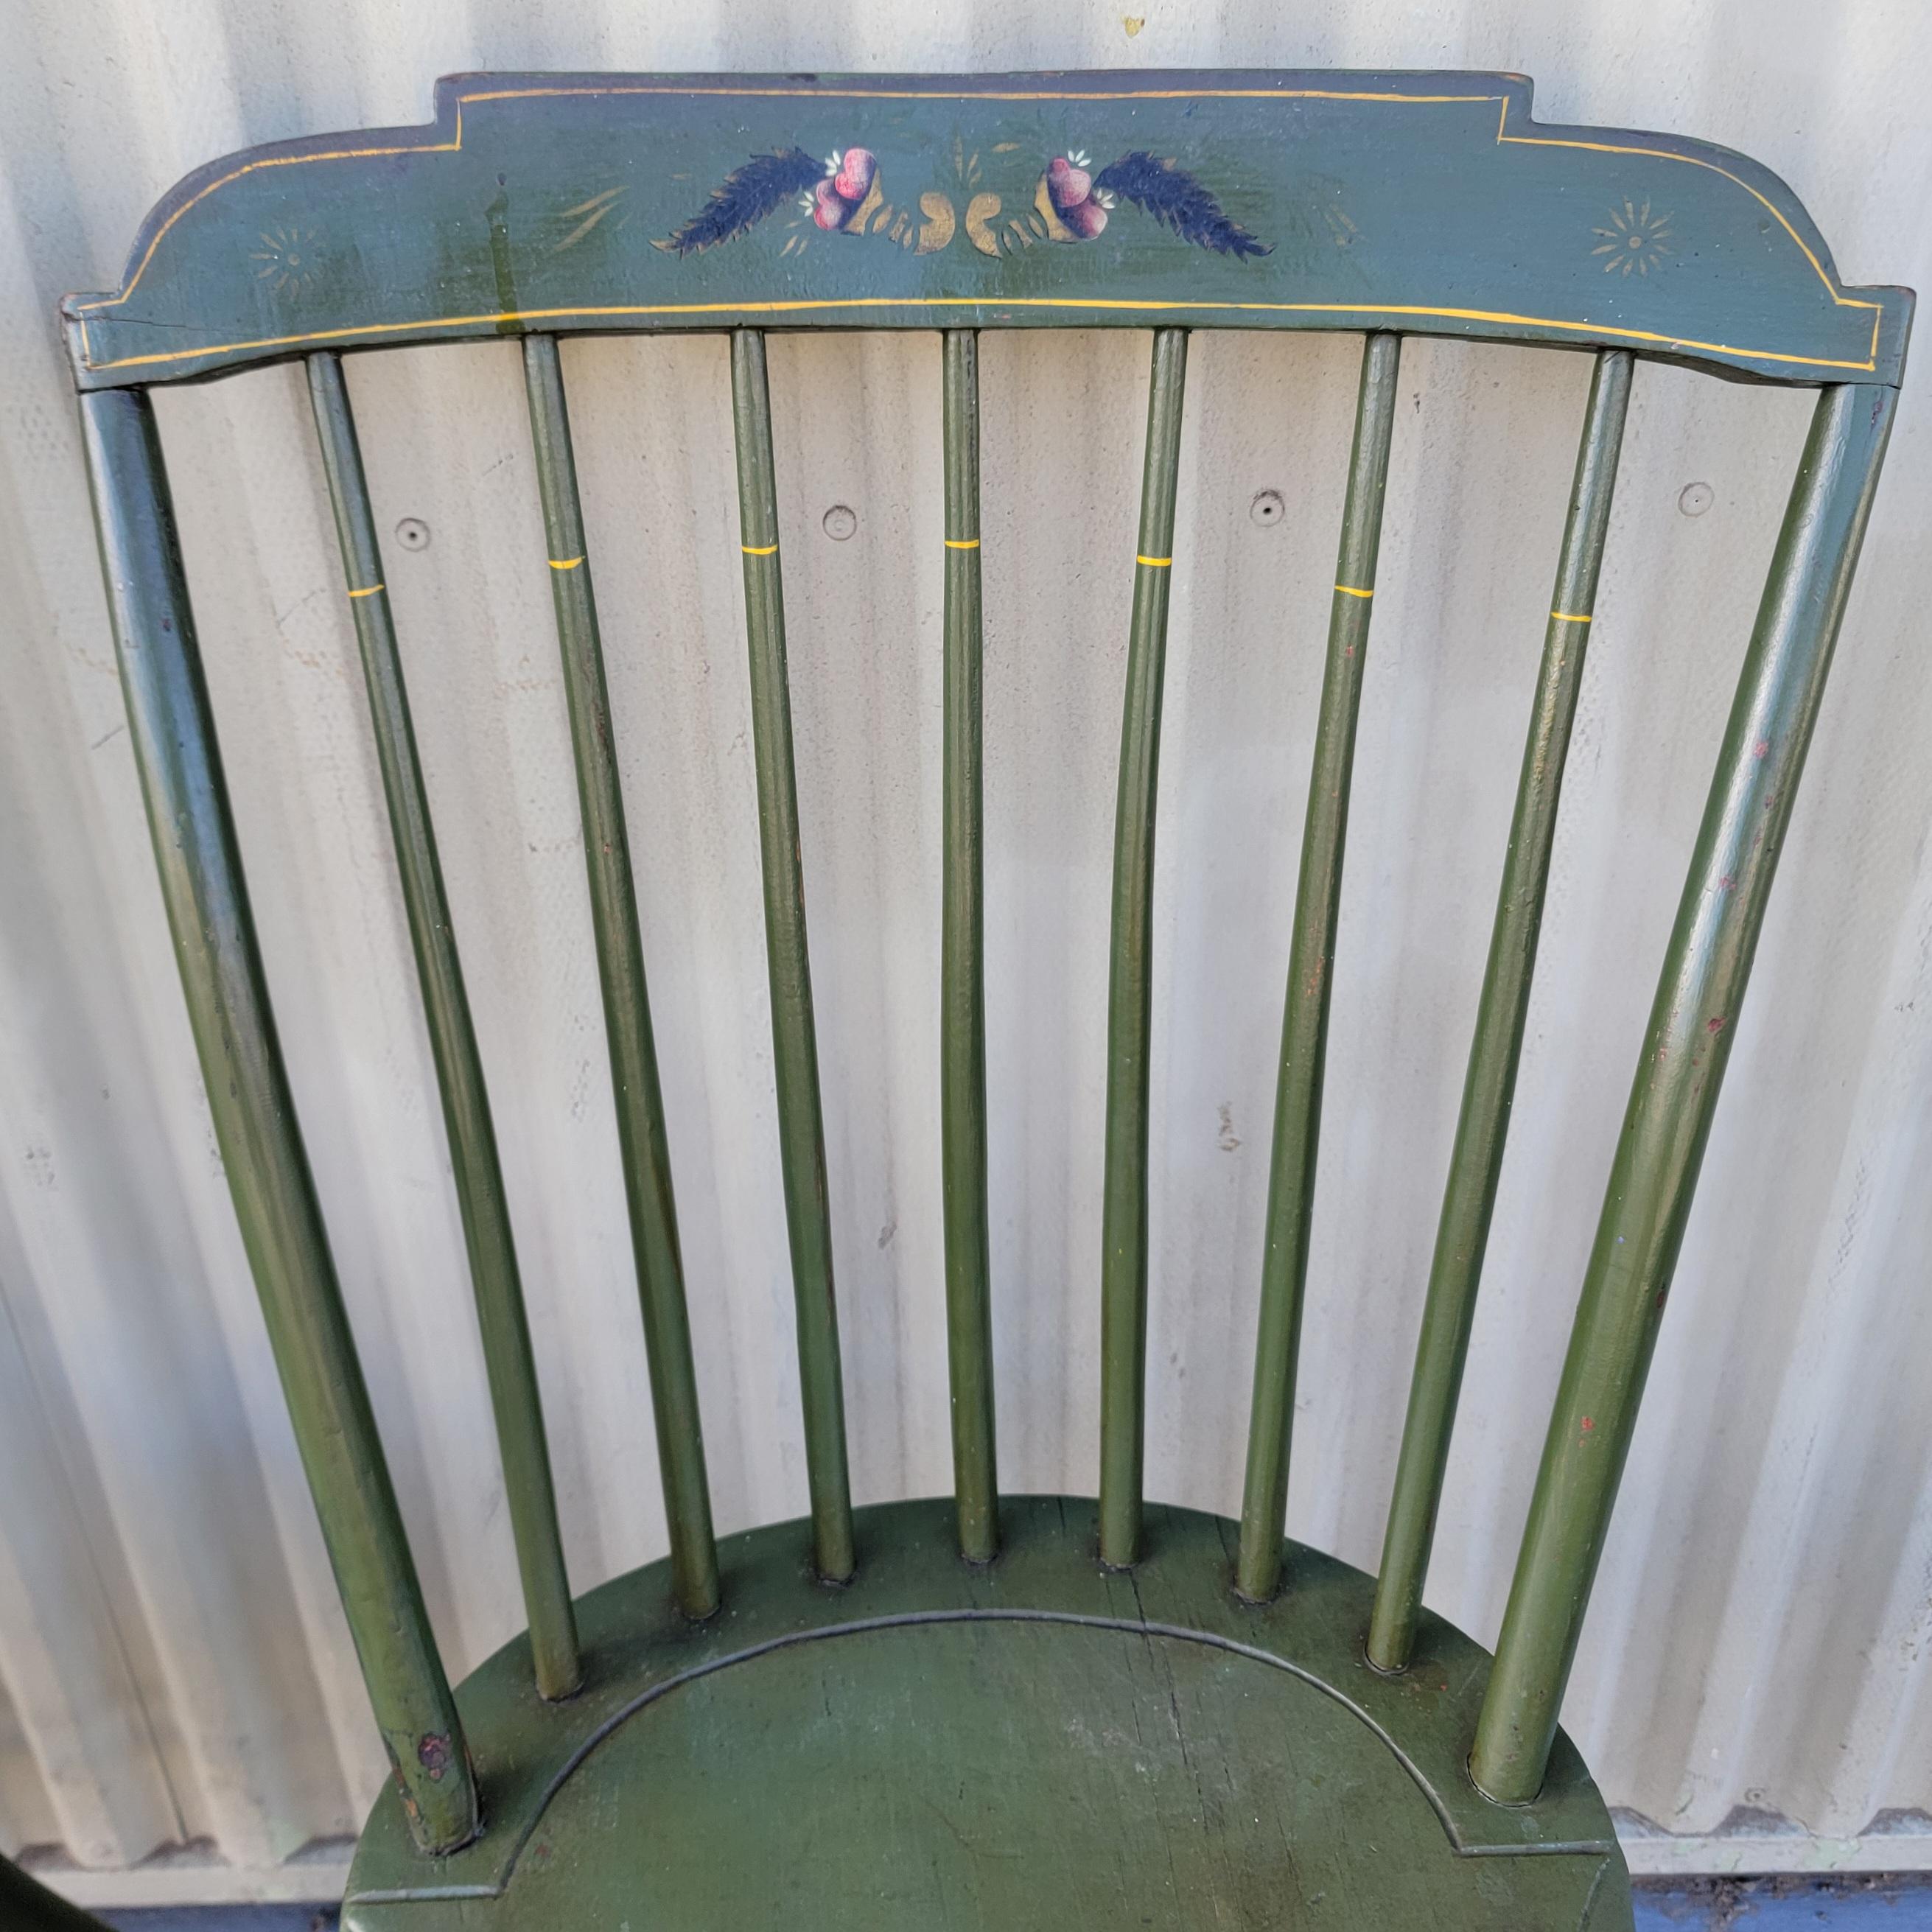 19Thc Original sour apple green painted step down New England Windsor chairs in fine condition.The chairs have fine little floral design on the top splash of each chair. All chairs are in fine & sturdy  condition.